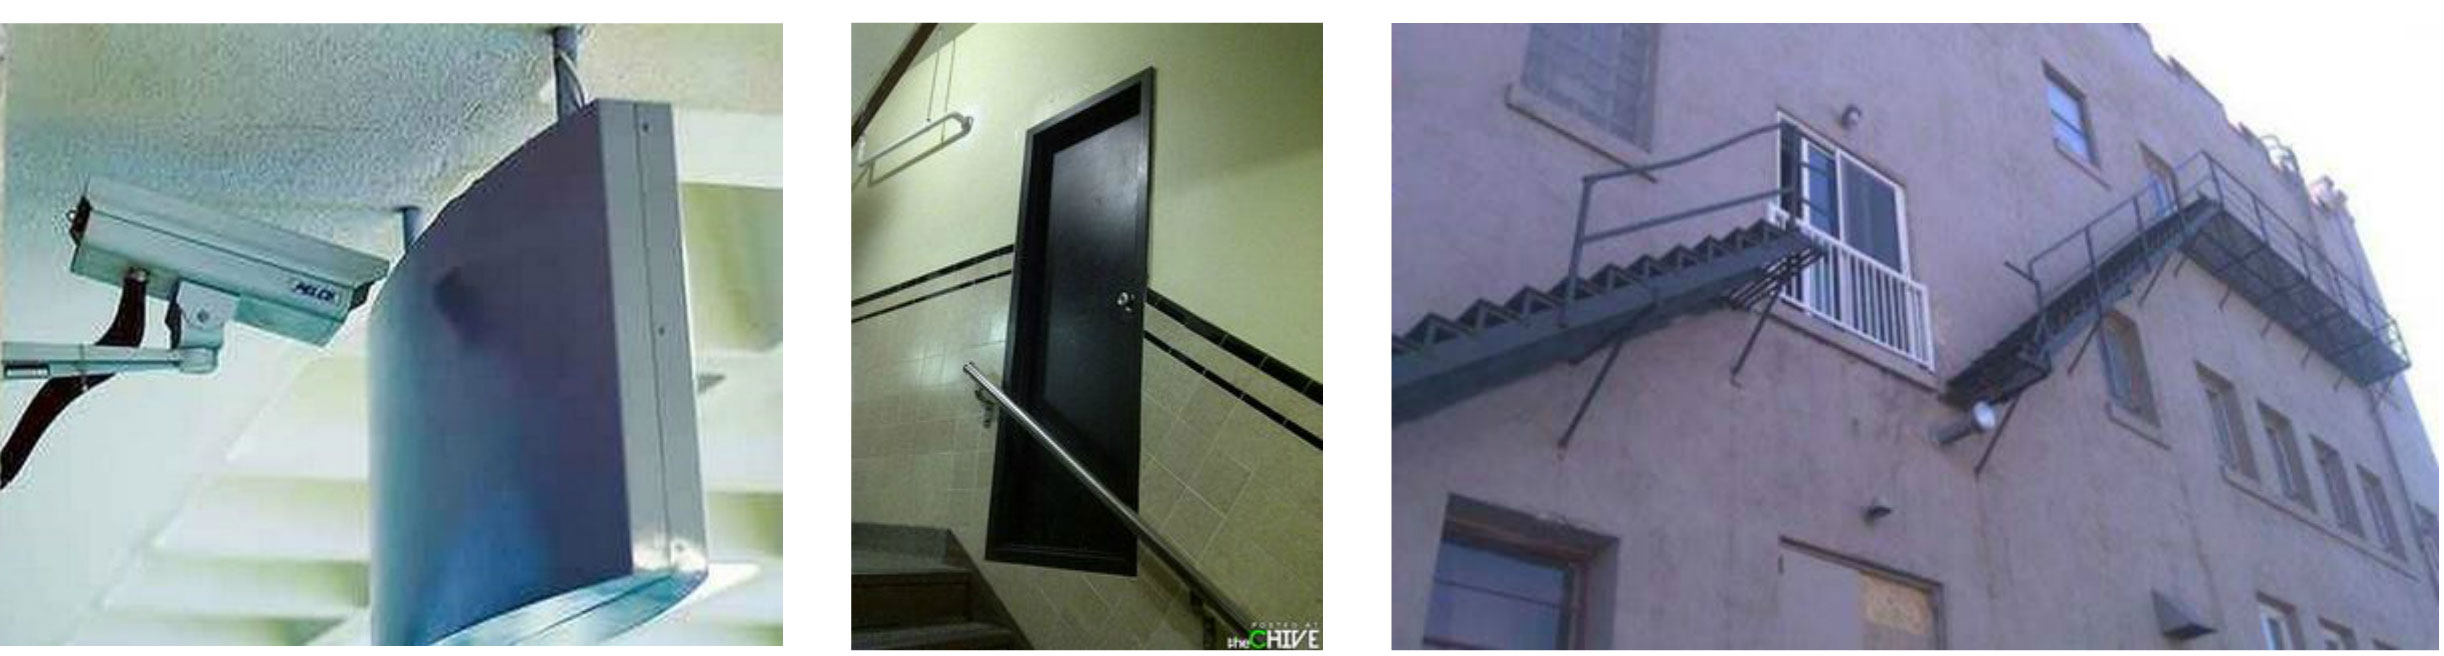 A photo of unsuccessful examples of facility design installations